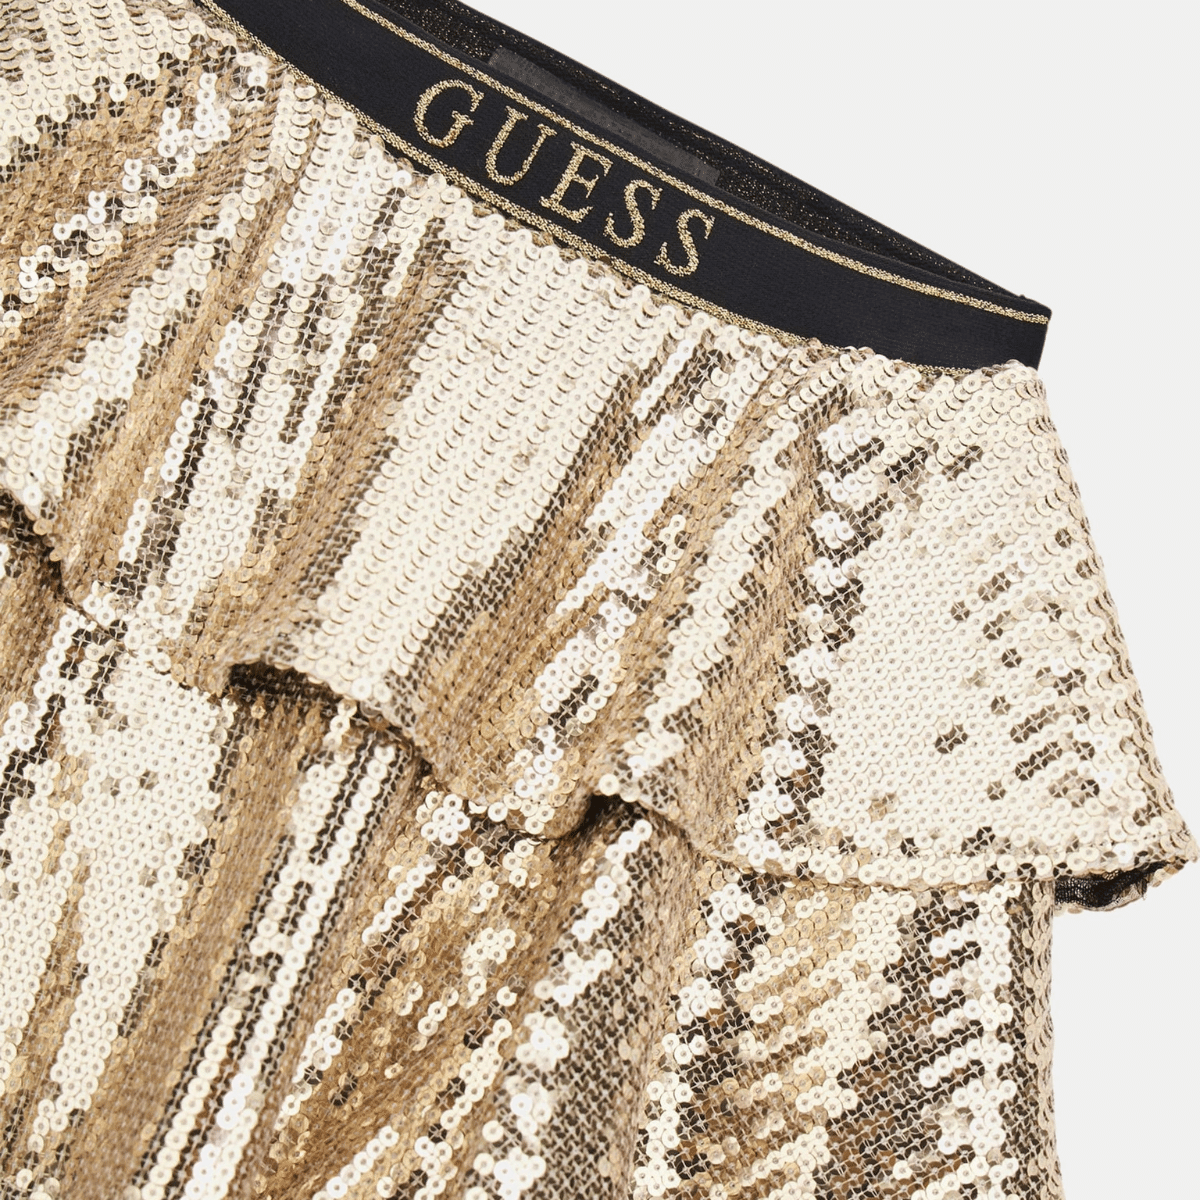 Guess sequin gold midi skirt close up